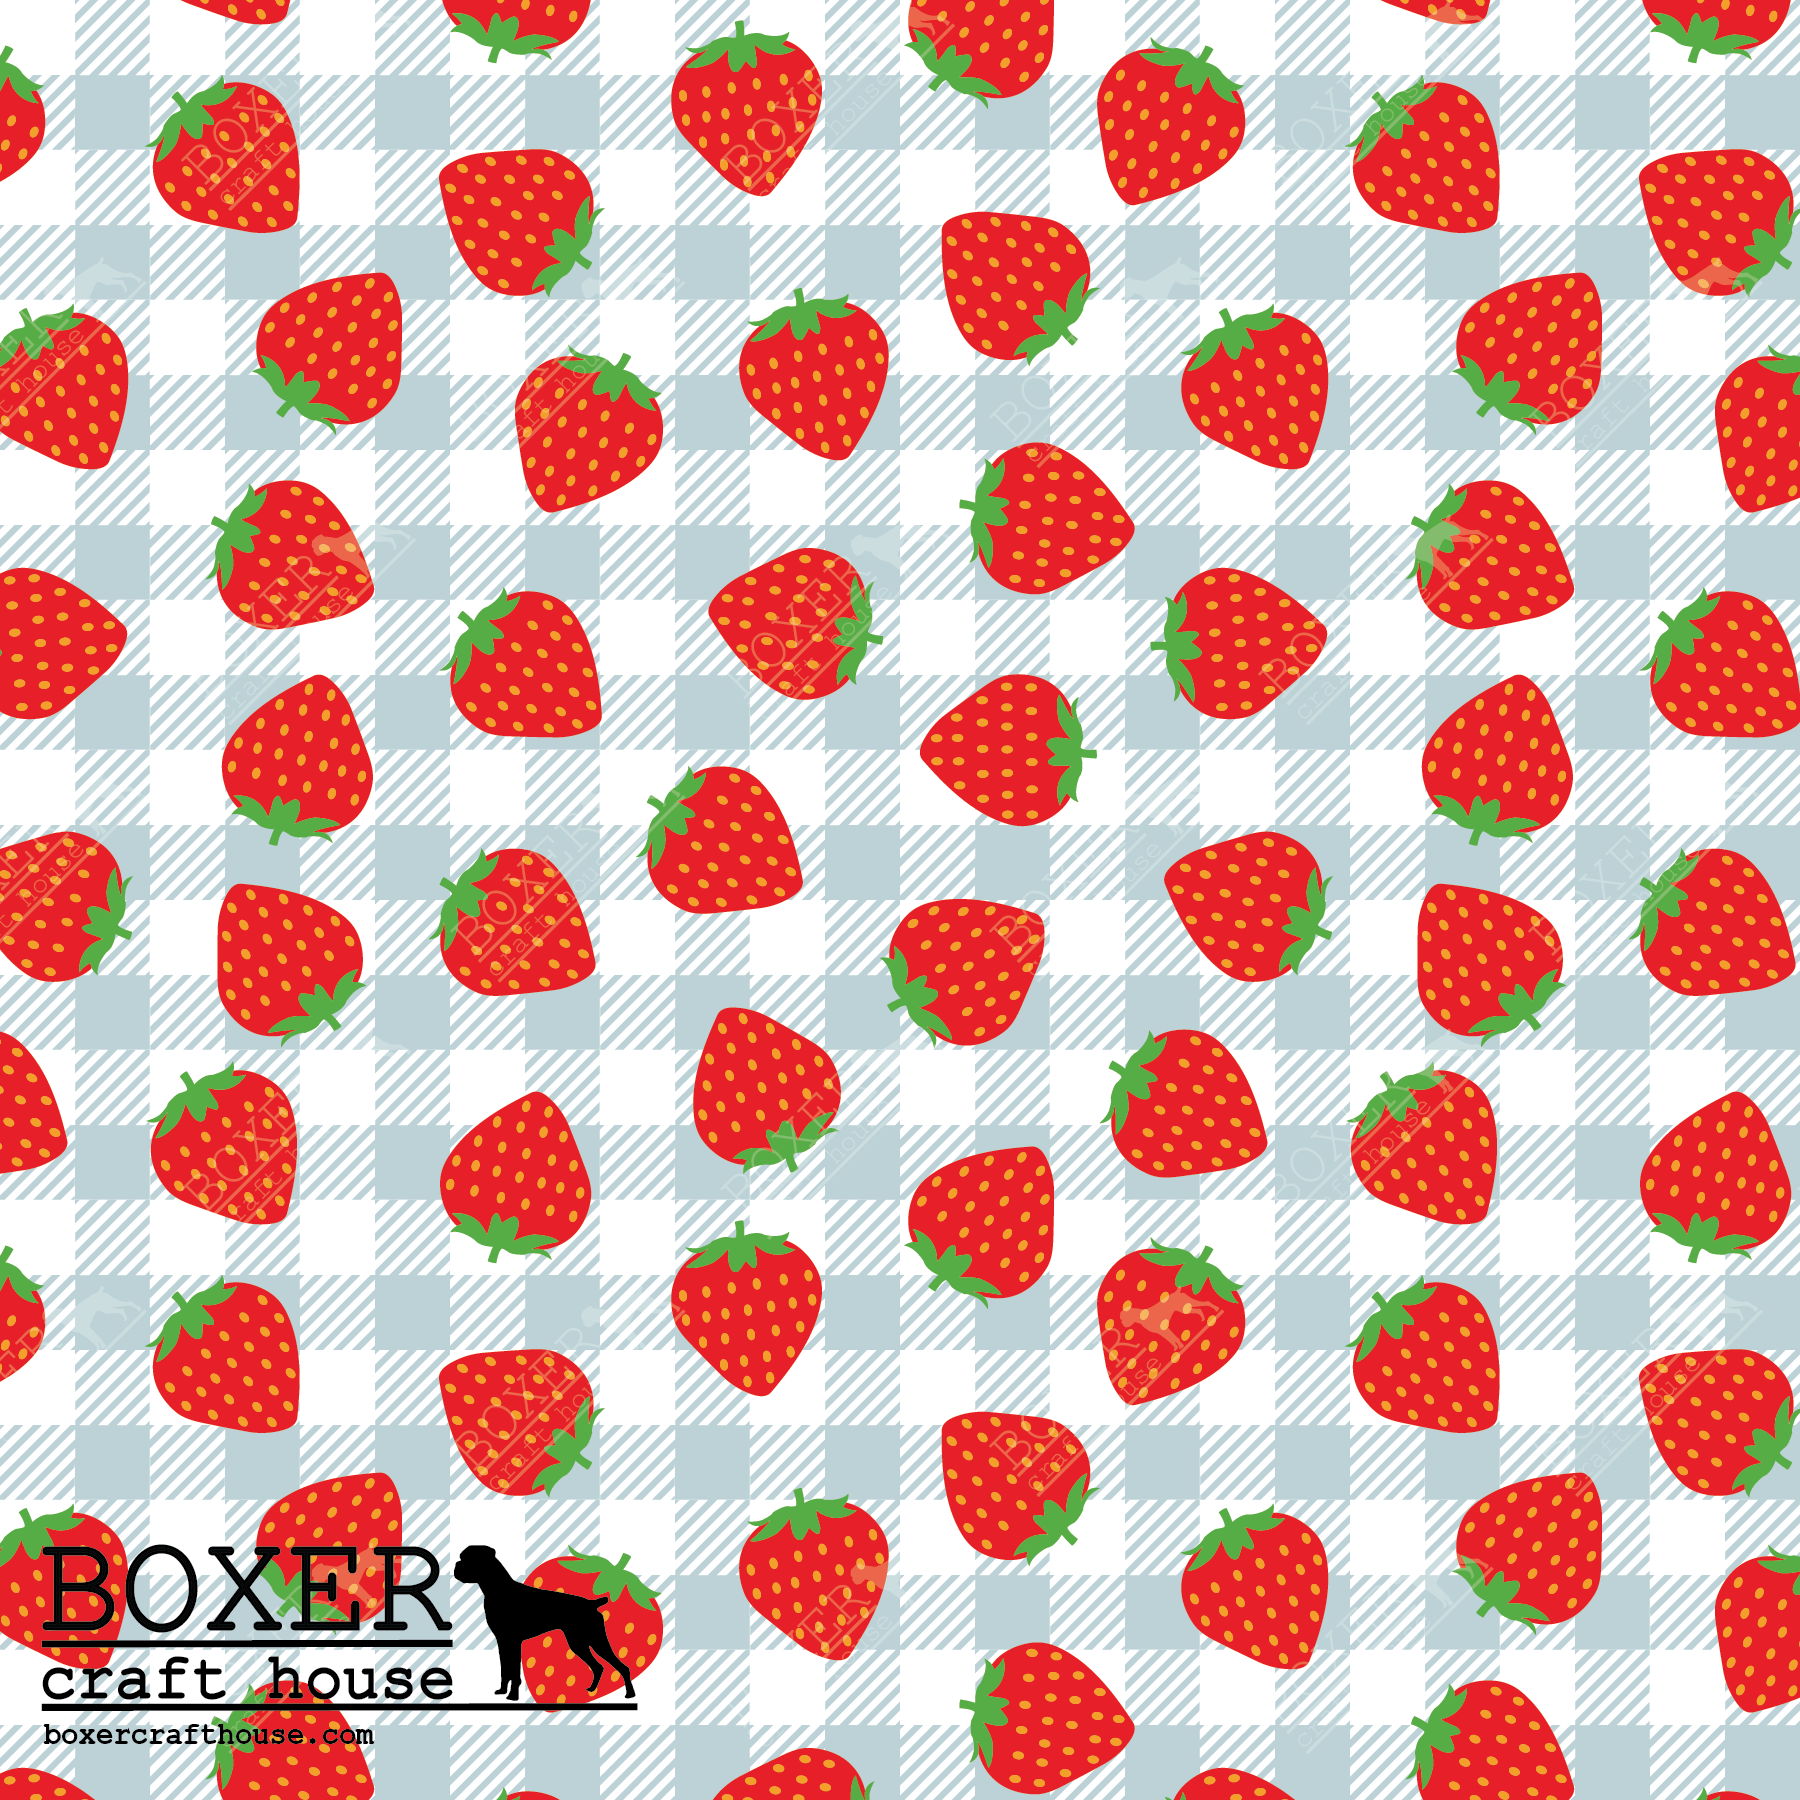 Strawberries Faux Leather, Embroidery Vinyl, Sewing Faux Leather, Bag Making Supplies, Faux Leather For Embroidery, Quality Faux Leather, Embroidery Supplies, Sewing Supplies, Woman Owned Business, Craft Supply Store, USA, In the Hoop Supplies, Sewing with vinyl,Specialty Vinyl, Printed in the USA Faux Leather, Strawberry Print, Strawberries, Strawberry Embroidery Vinyl, Strawberry Faux Leather, Fruit Faux Leather